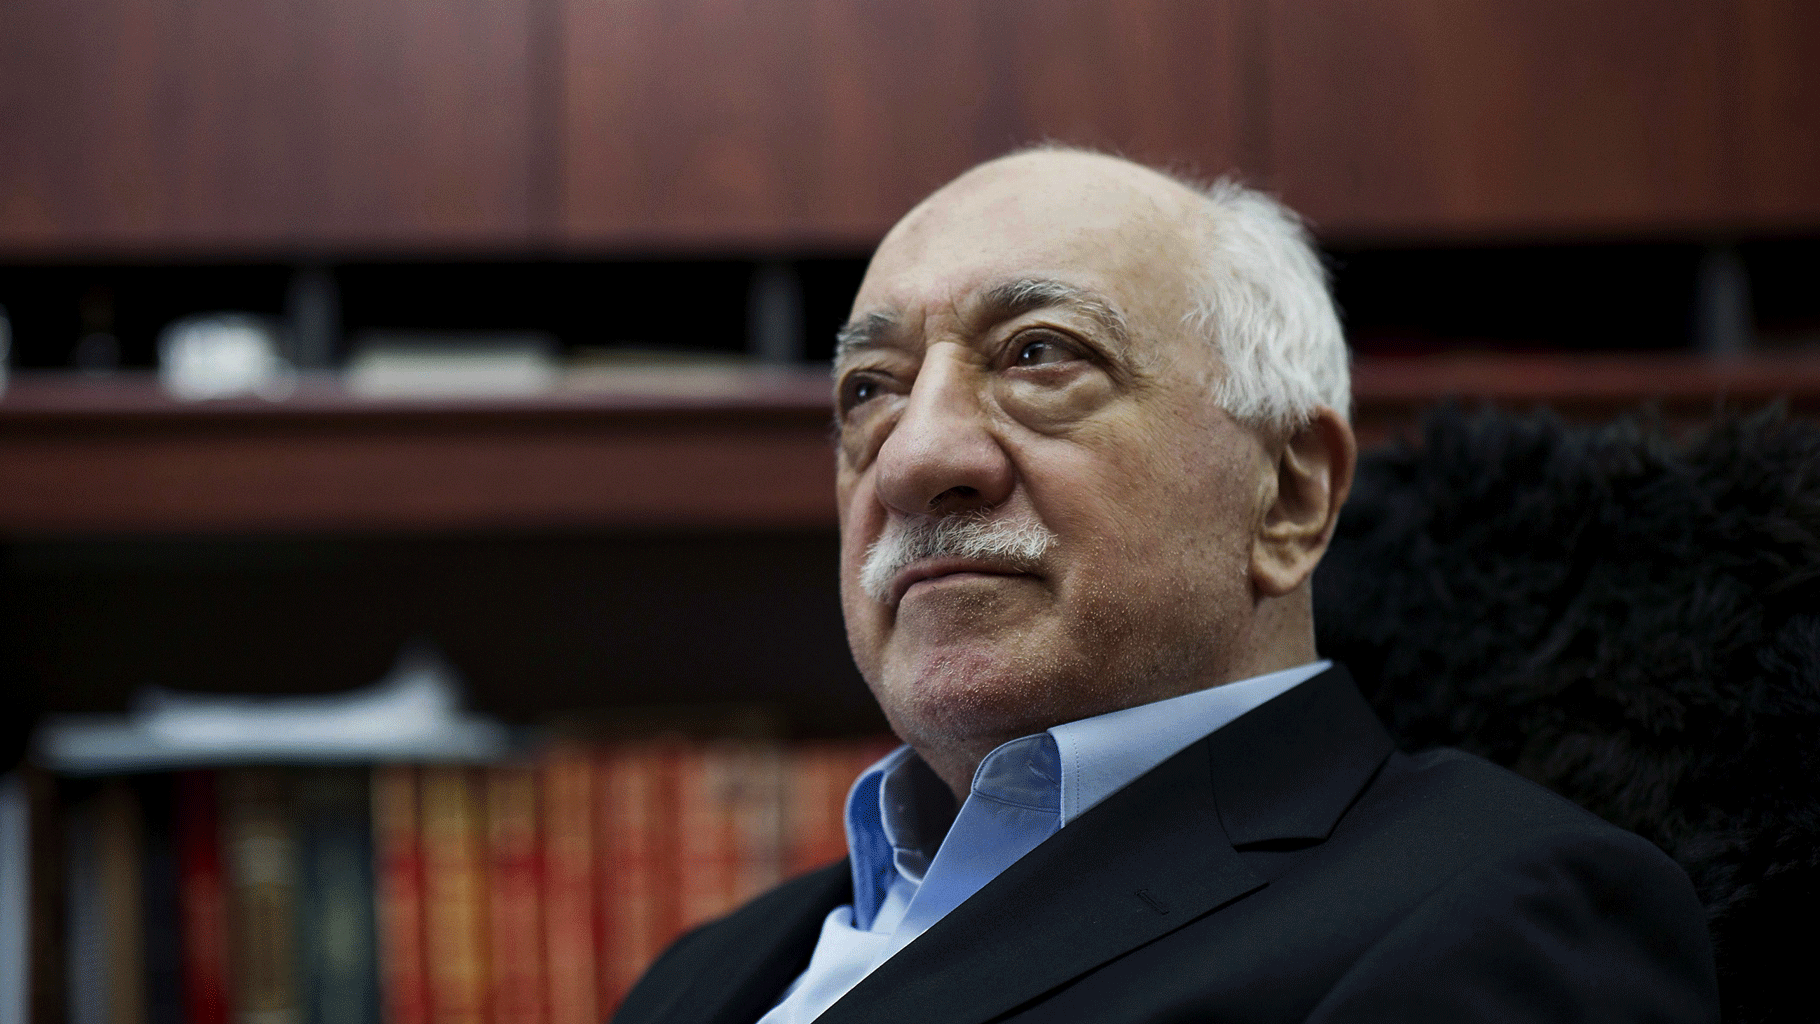 

Fethullah Gulen might be directly involved in the coup attempt in Turkey, says Turkish government lawyer Robert Amsterdam. (Photo: AP)